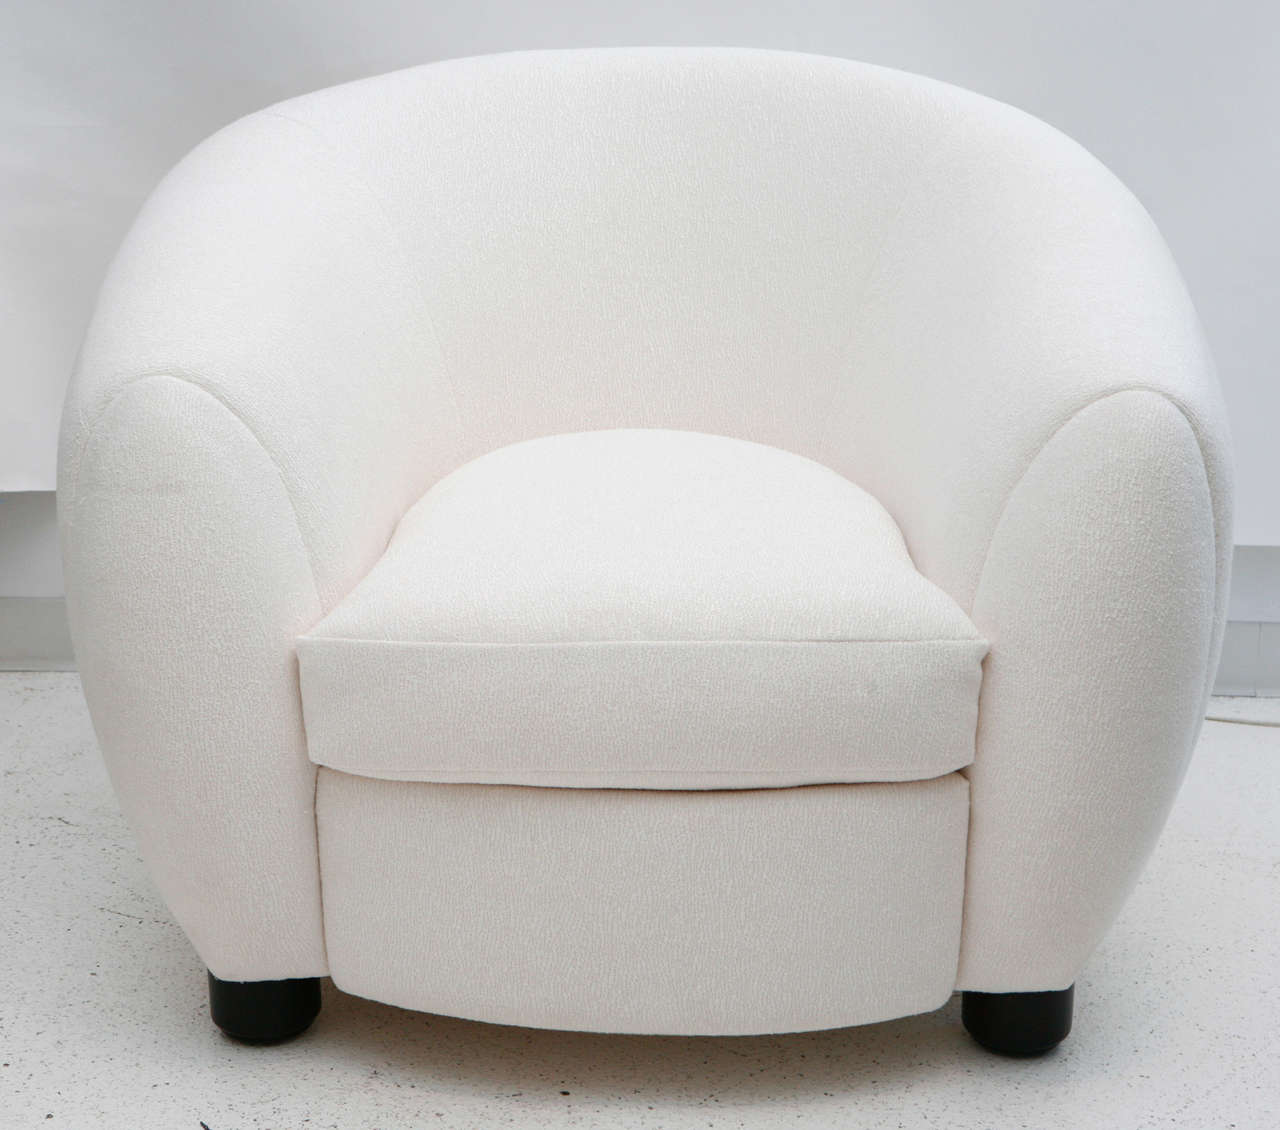 A faithful circa 1980s reproduction of Jean Royère's classic Polar Bear chair, this extremely comfortable oversized armchair has been newly reupholstered in a textured white boucle fabric.